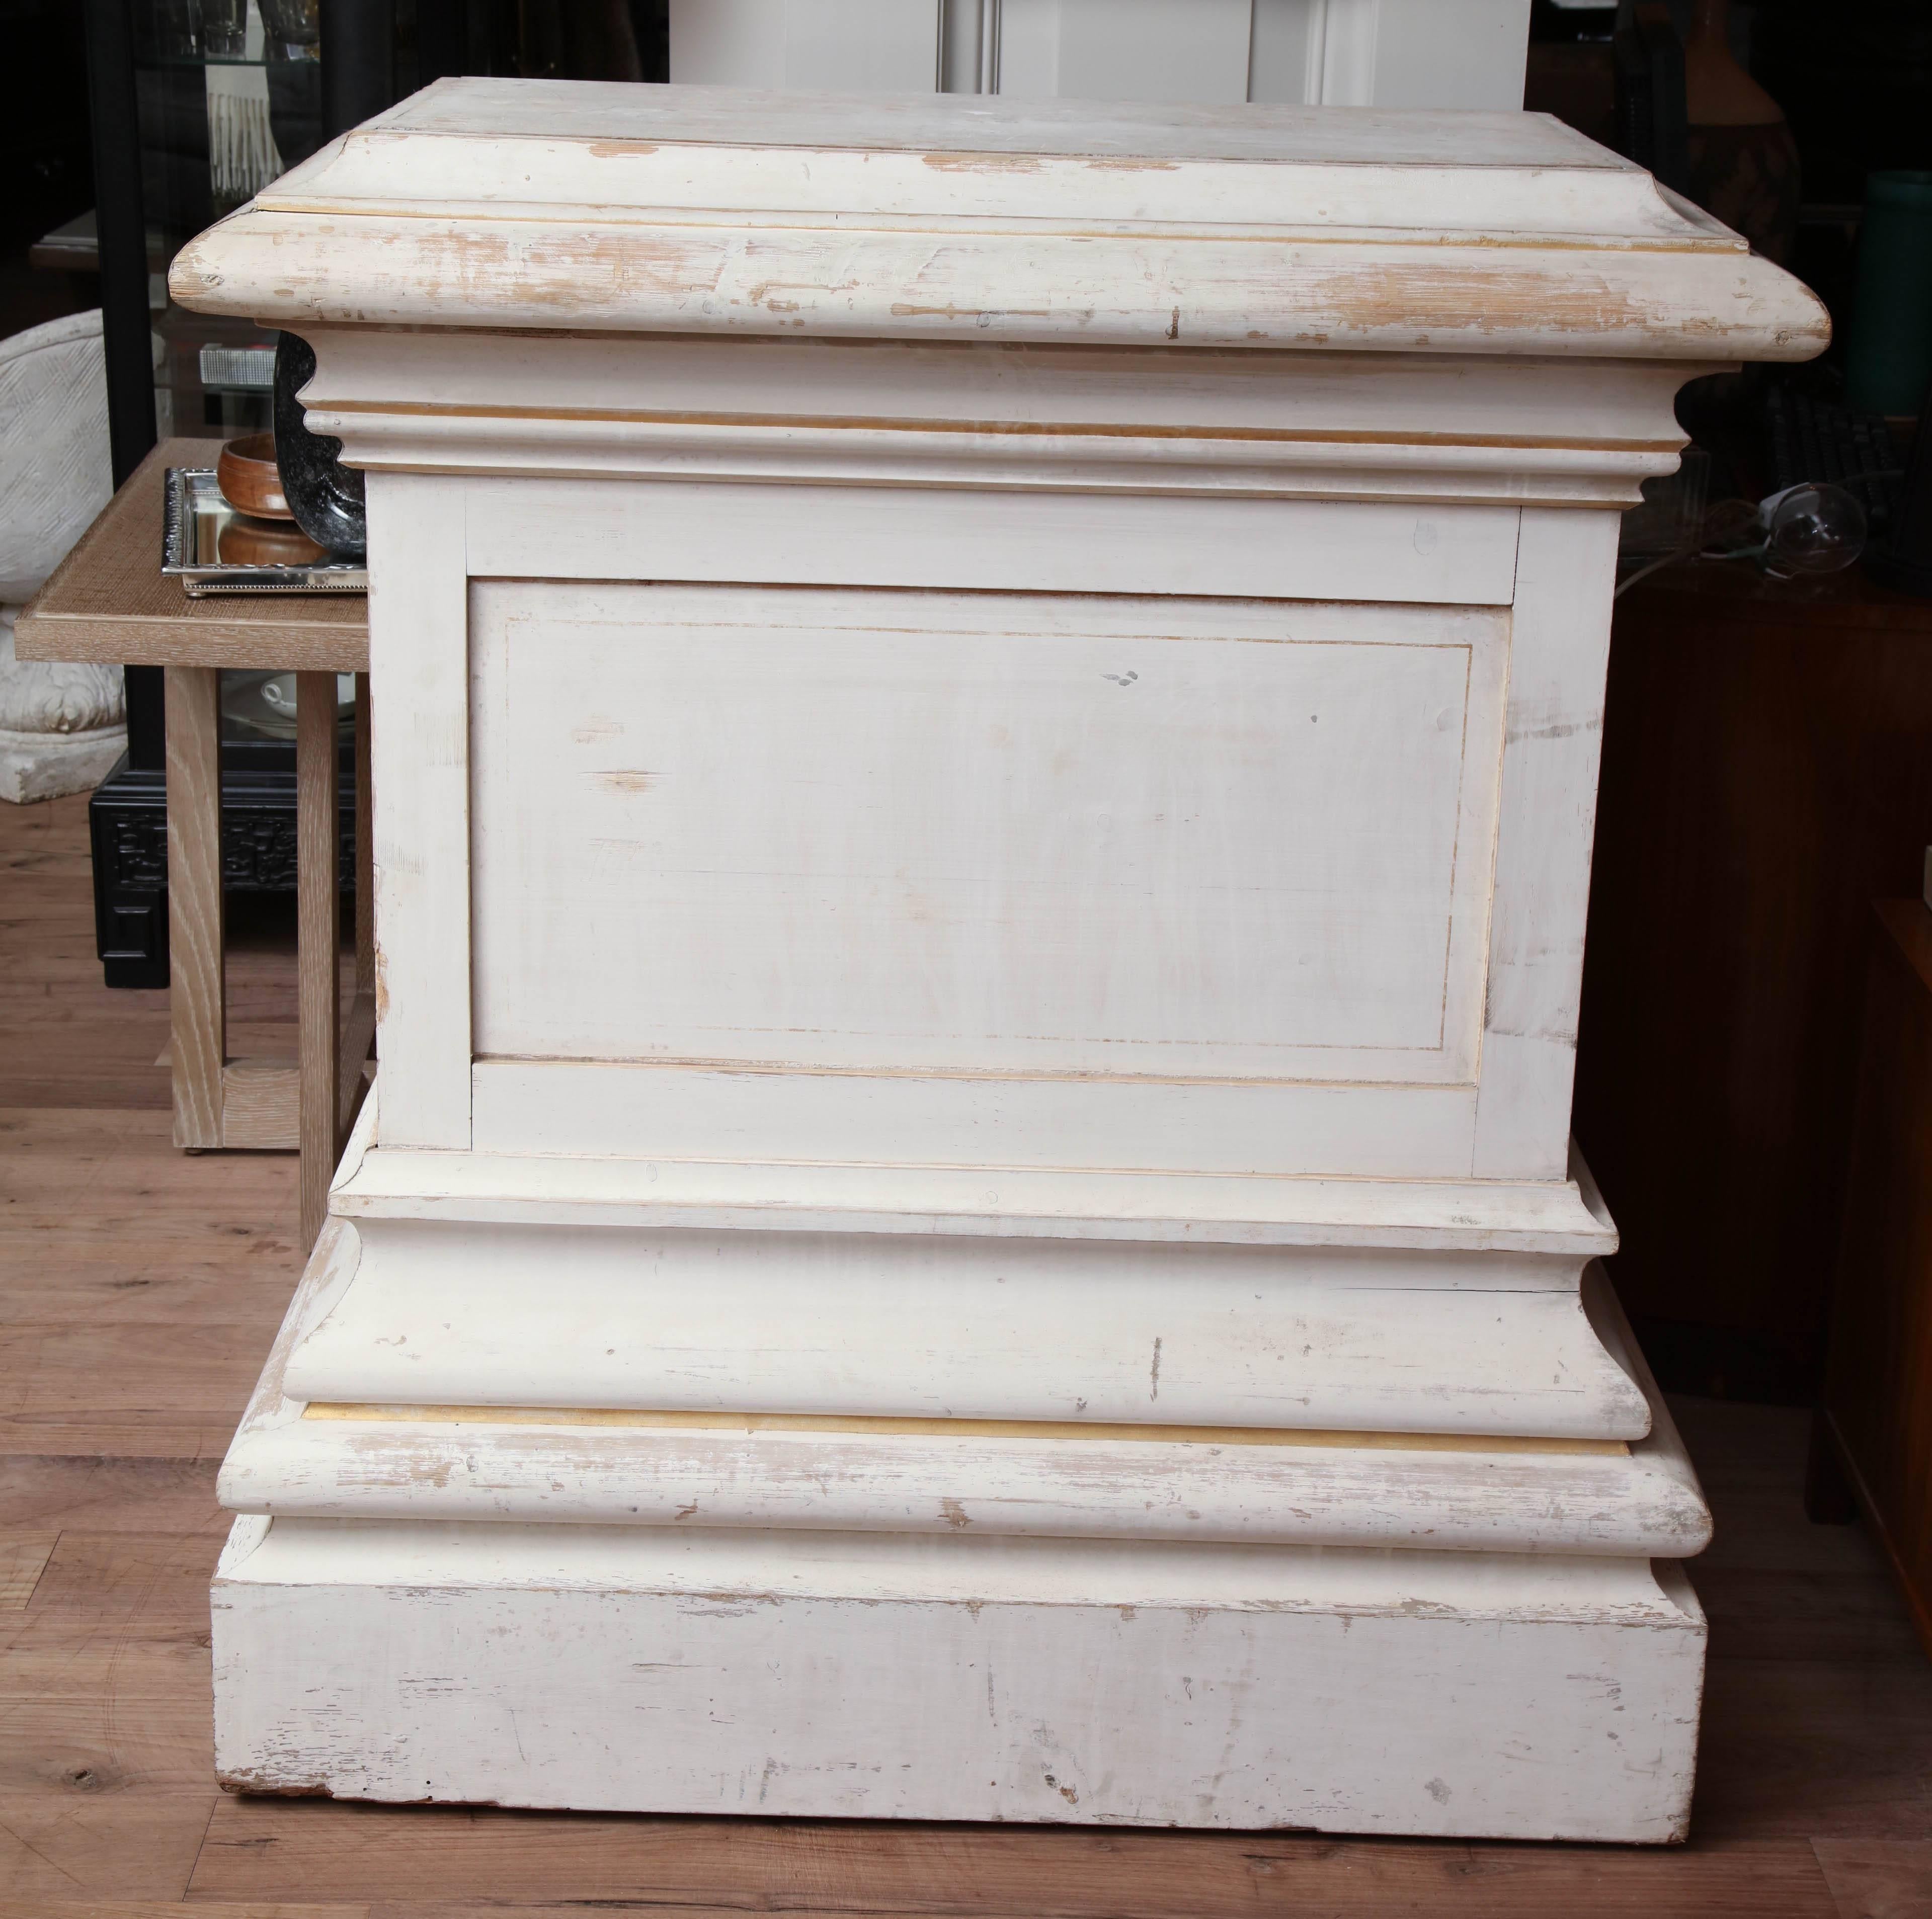 Pair of antique white painted pedestals, consoles or table stands, circa 1900.